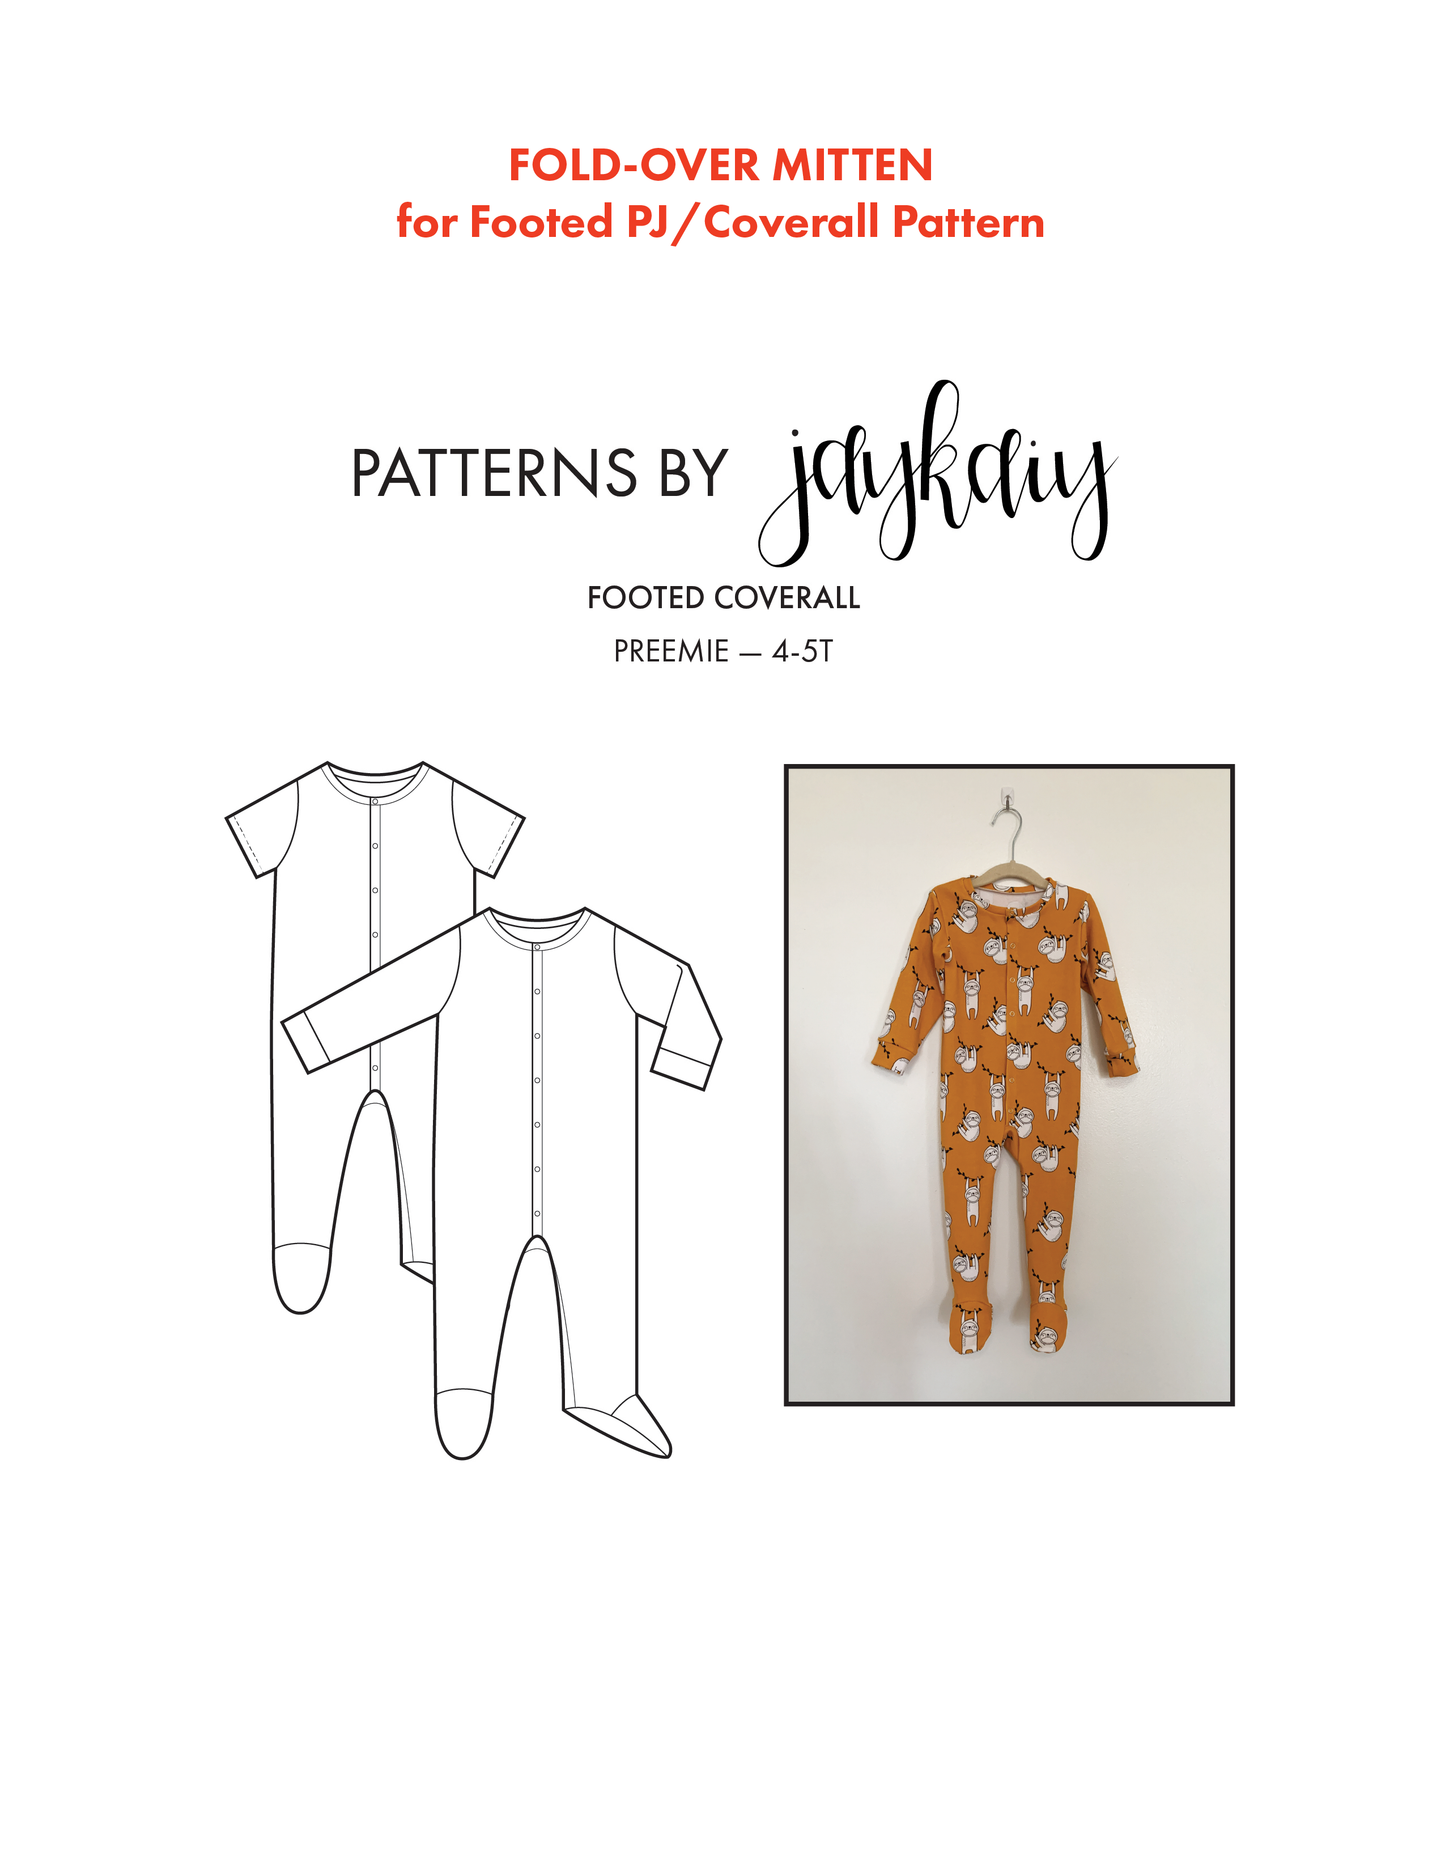 Fold-over Mitten ADD-ON for Footed PJ & Jumpsuit Pattern